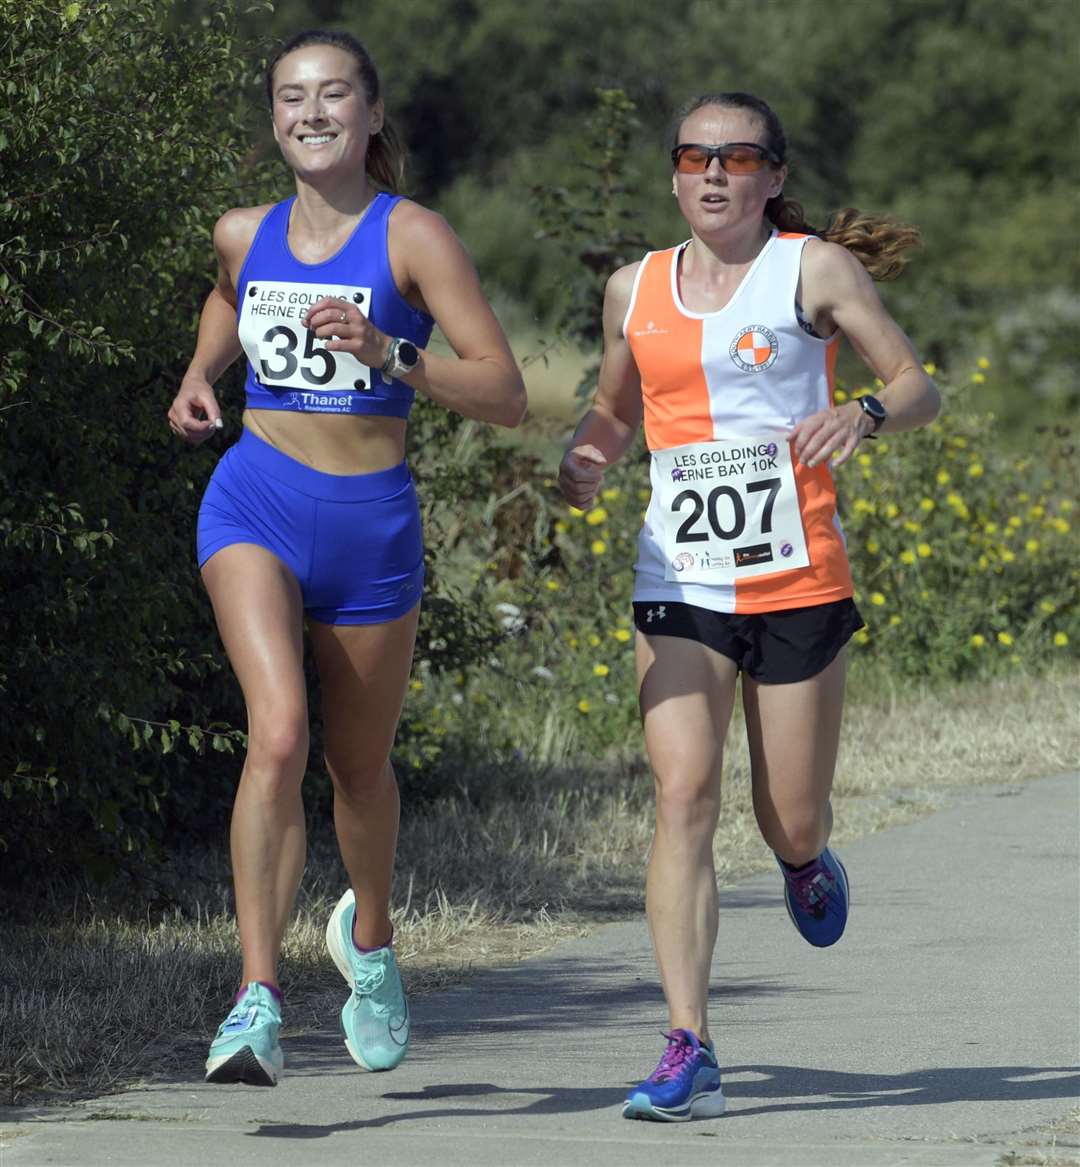 The leading ladies No.35 Abigail Cardwell of Thanet Road Runners, who finished just two seconds behind winner No.207 Amy Seager of South Kent Harriers. Picture: Barry Goodwin (58030738)